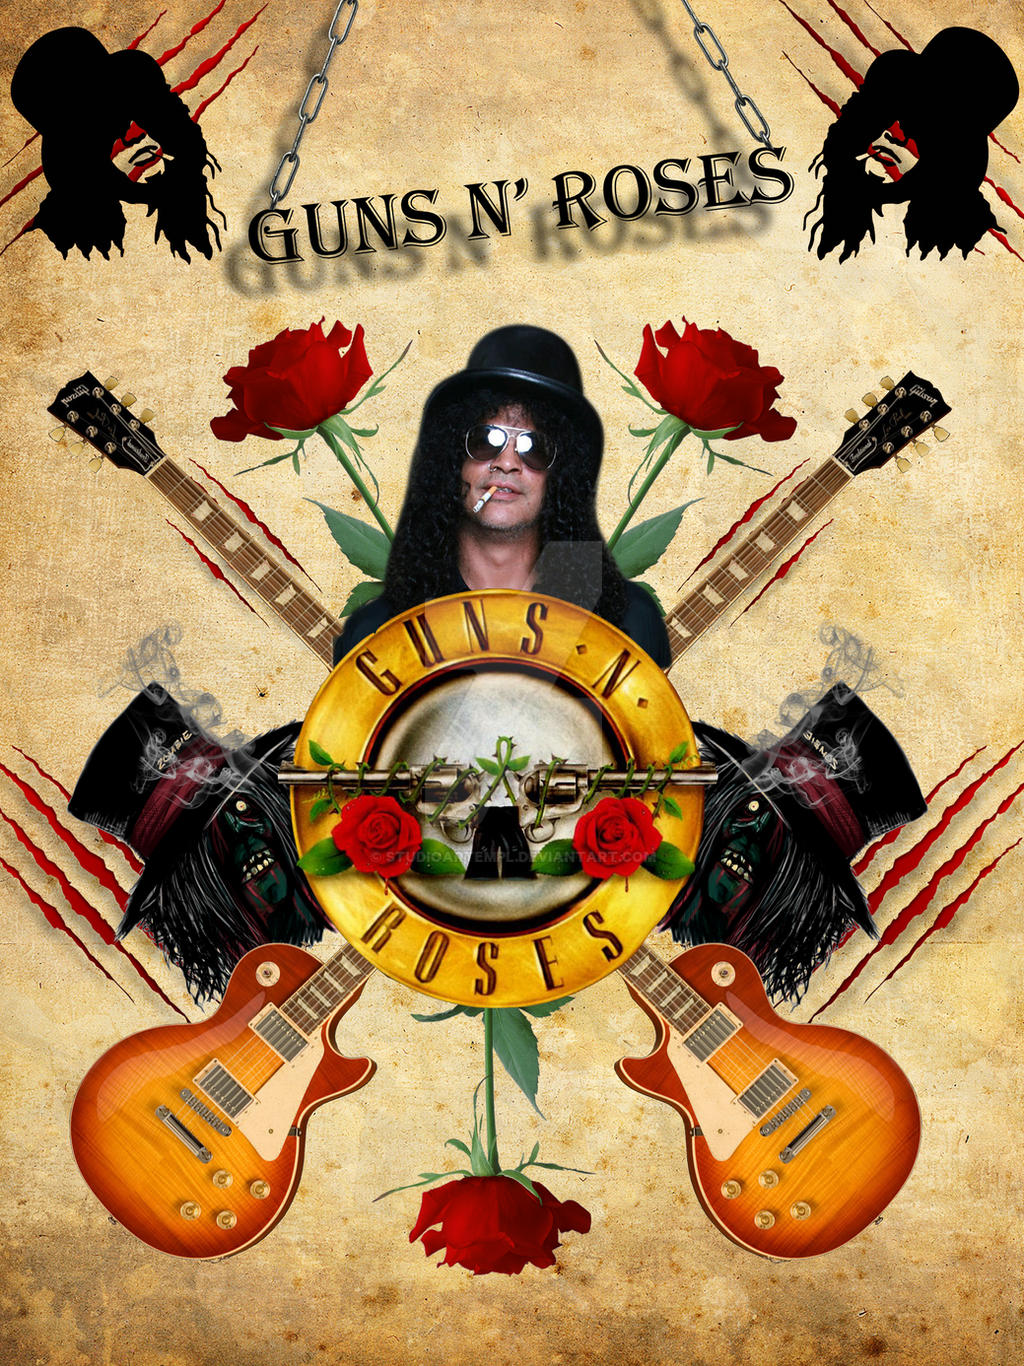 Guns n' roses were having to take to the stage later and later, or the...